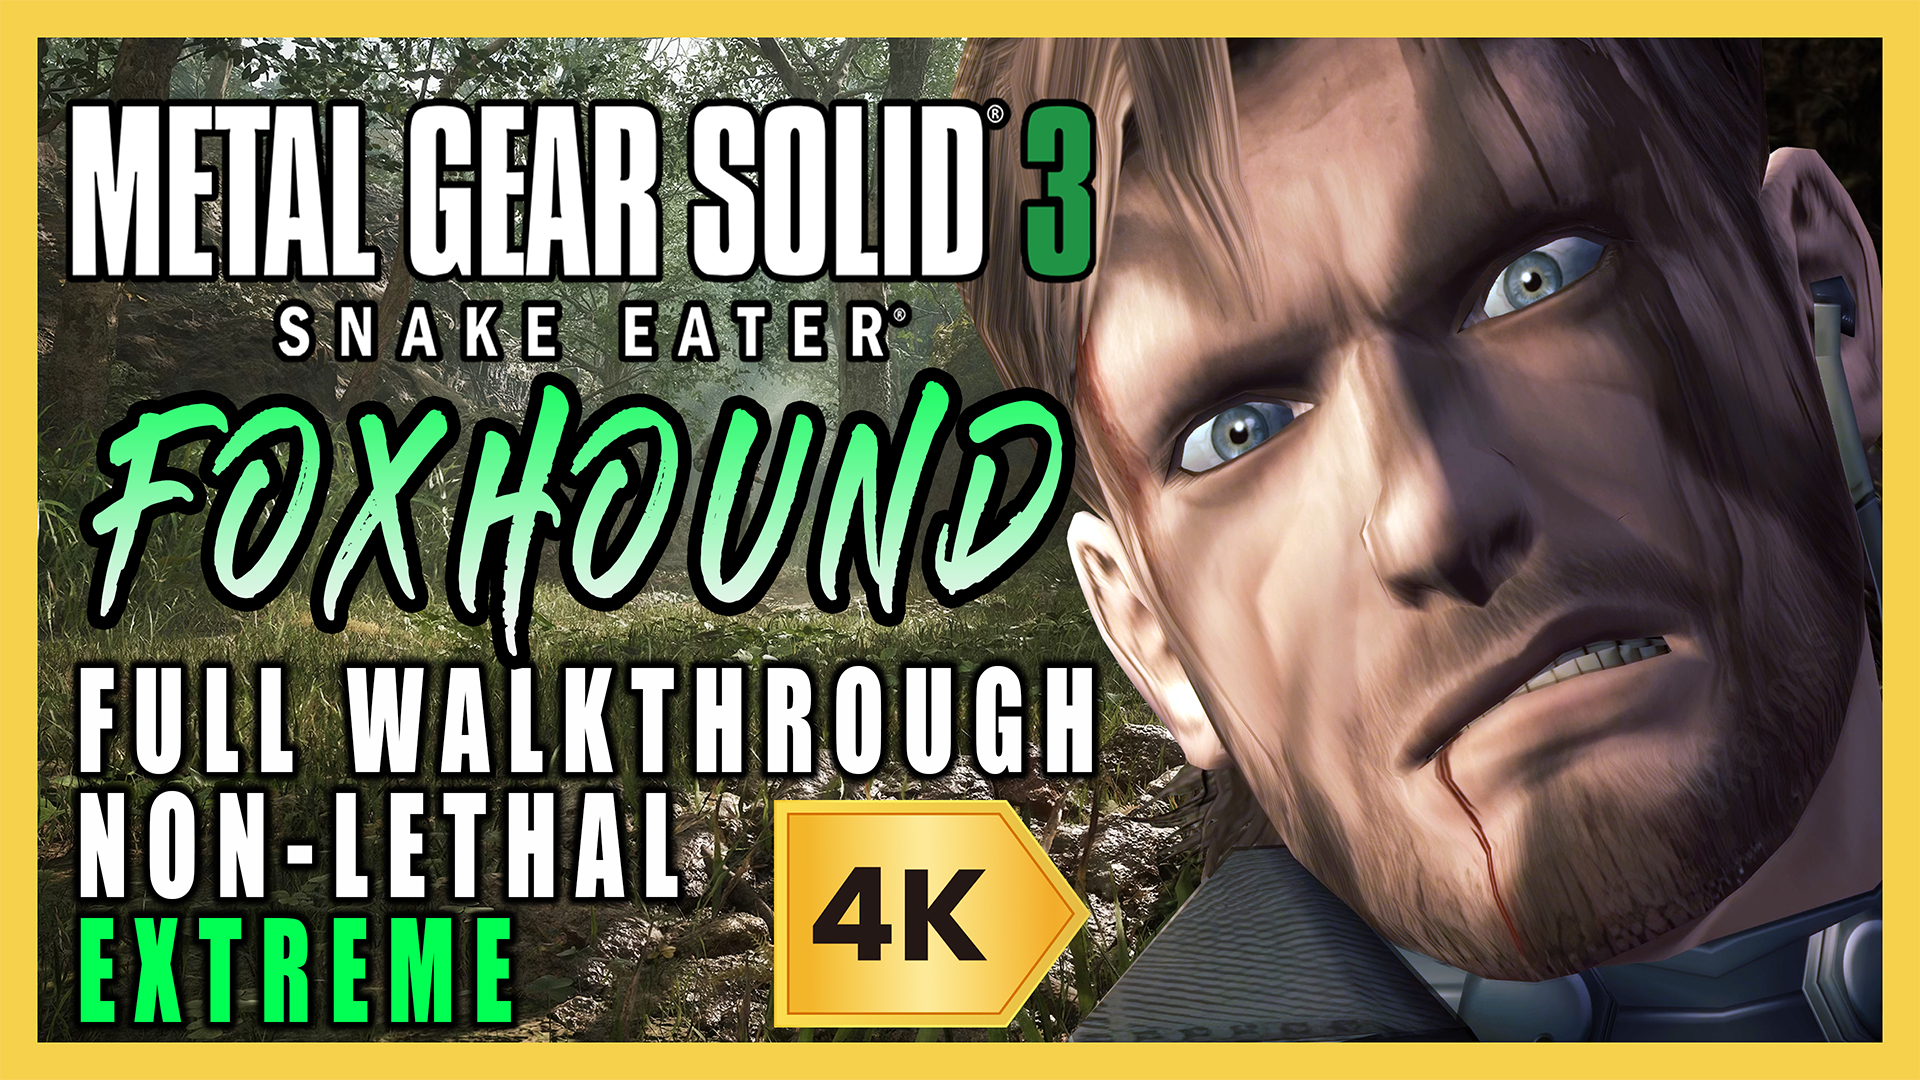 mgs3-extreme-run-4k-non-lethal-foxhound-master-collection-no-alerts-walkthrough-guide-lord-kayoss-metal-gear-solid-3-snake-eater